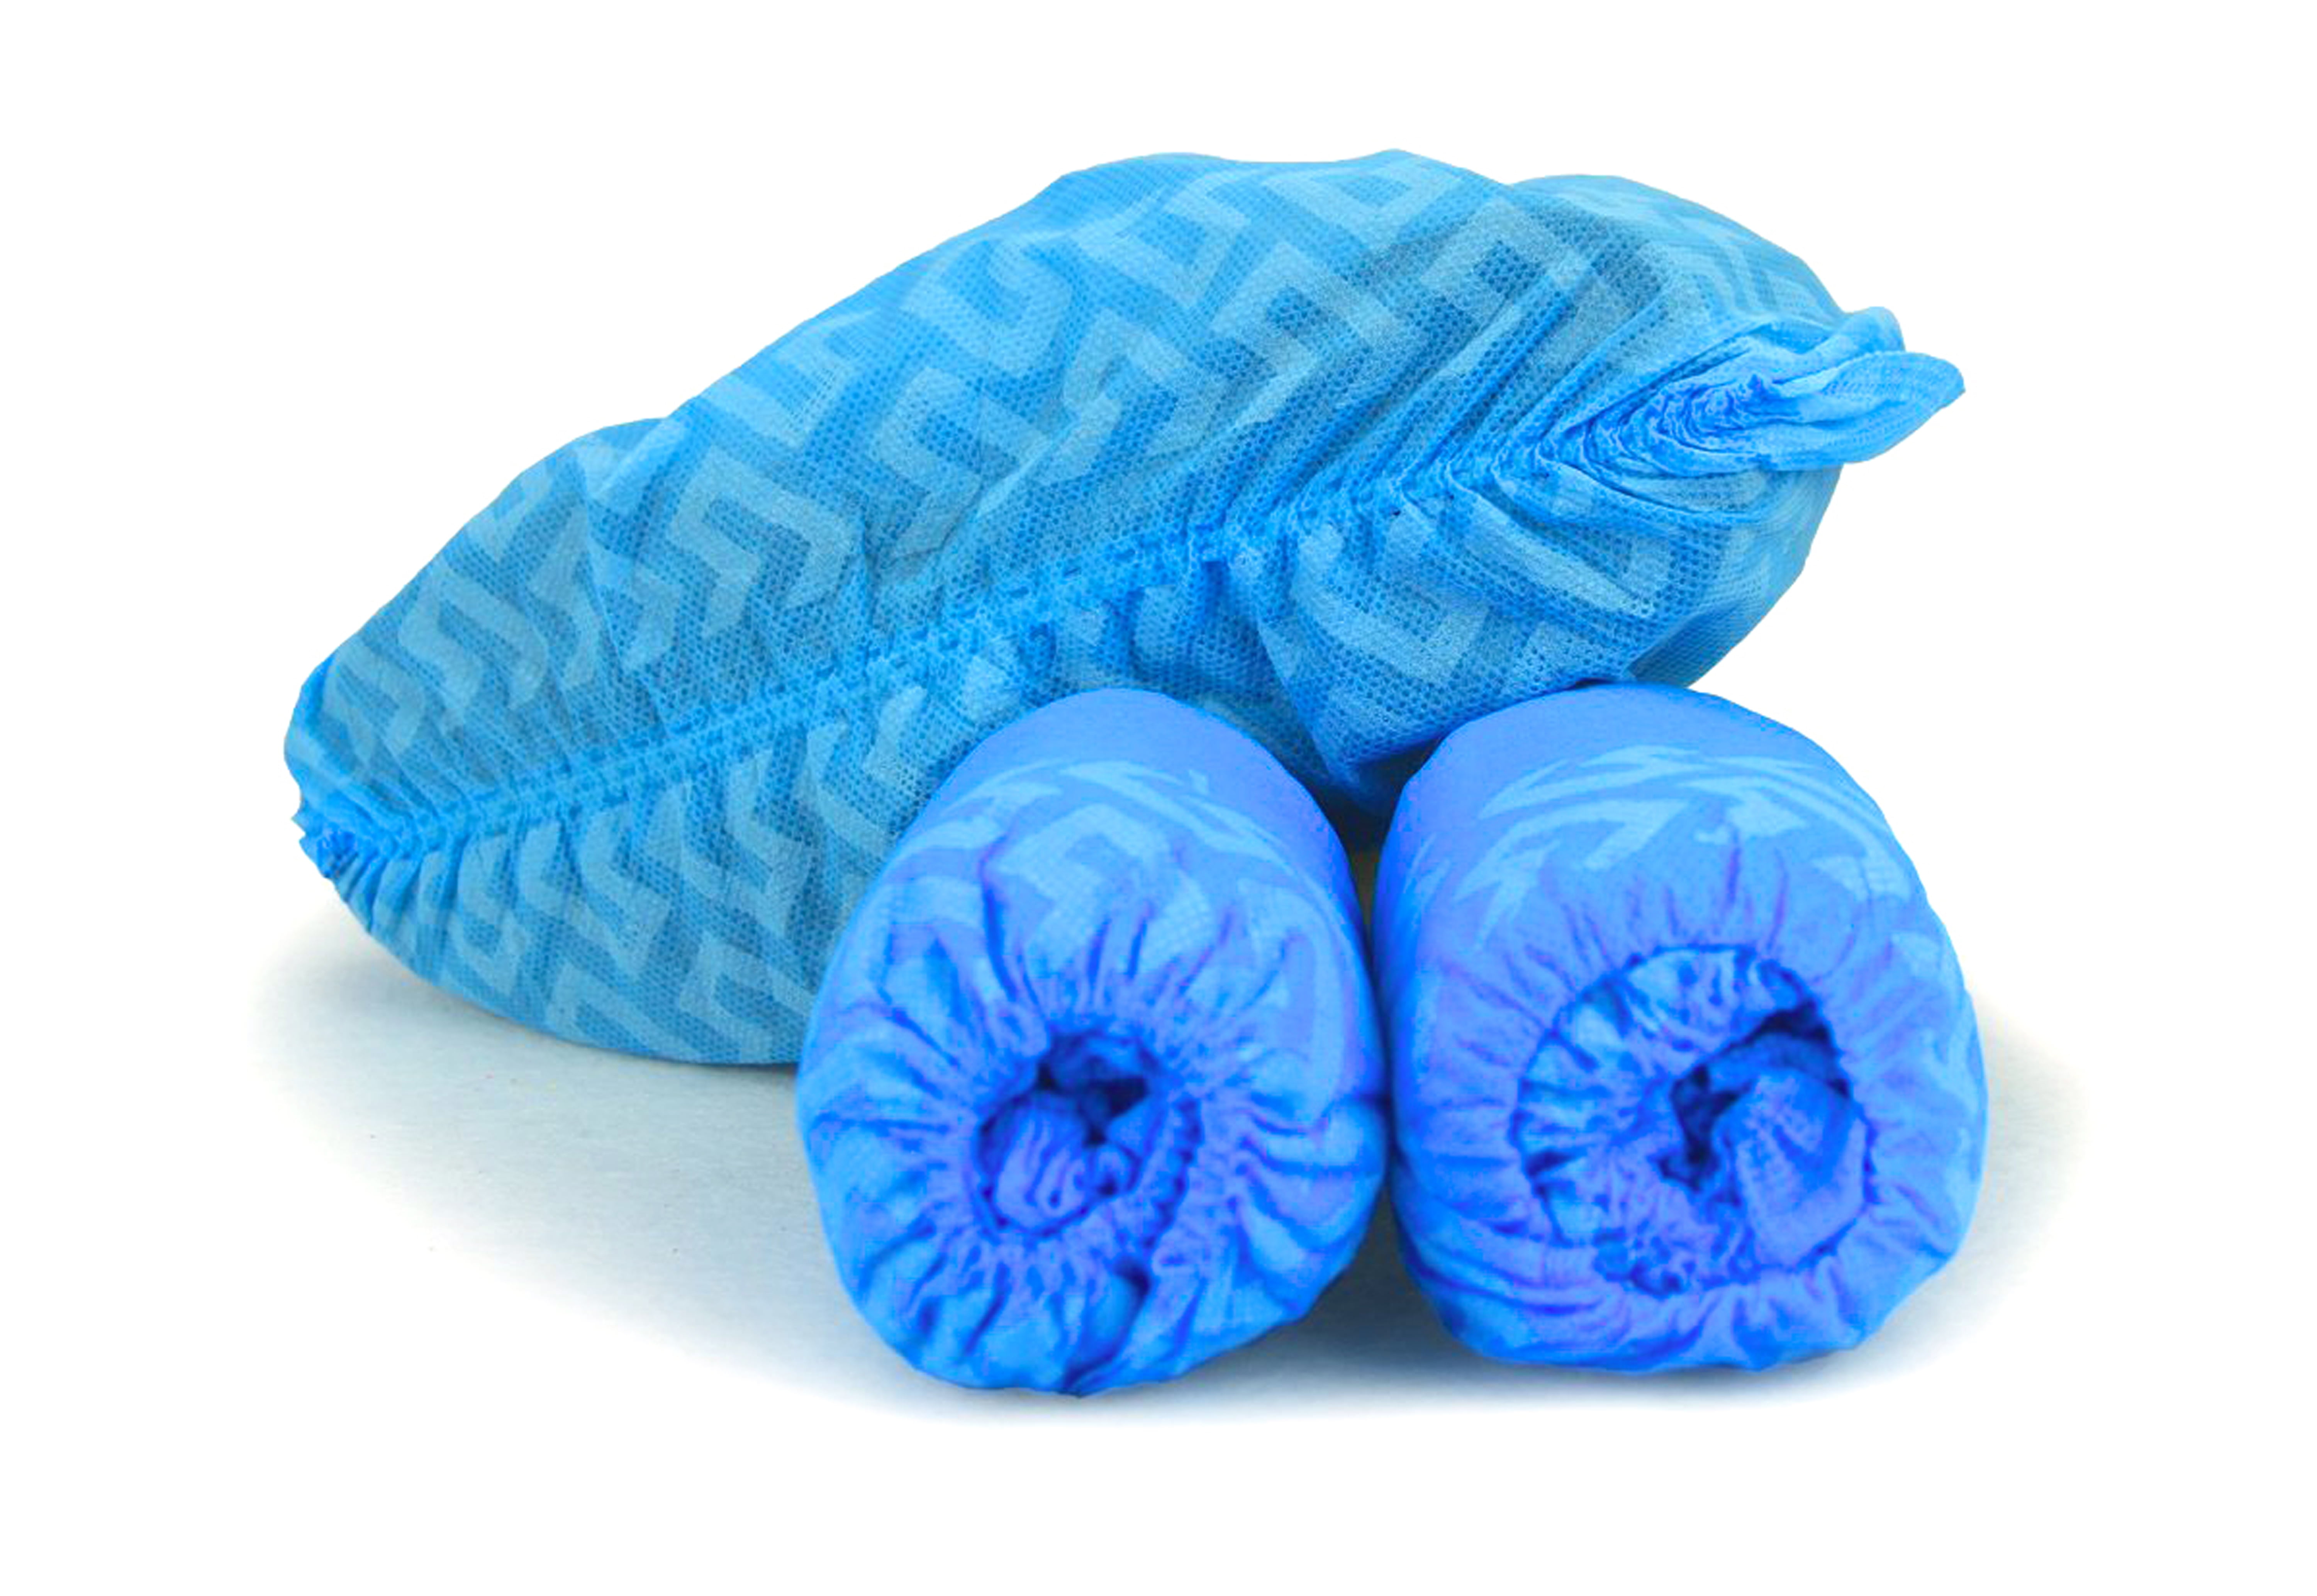 Color:blue Garciakia 100Pcs Plastic Waterproof Disposable Shoe Covers Rainy Day Carpet Floor Protector Thick Cleaning Shoe Cover Blue Overshoes 